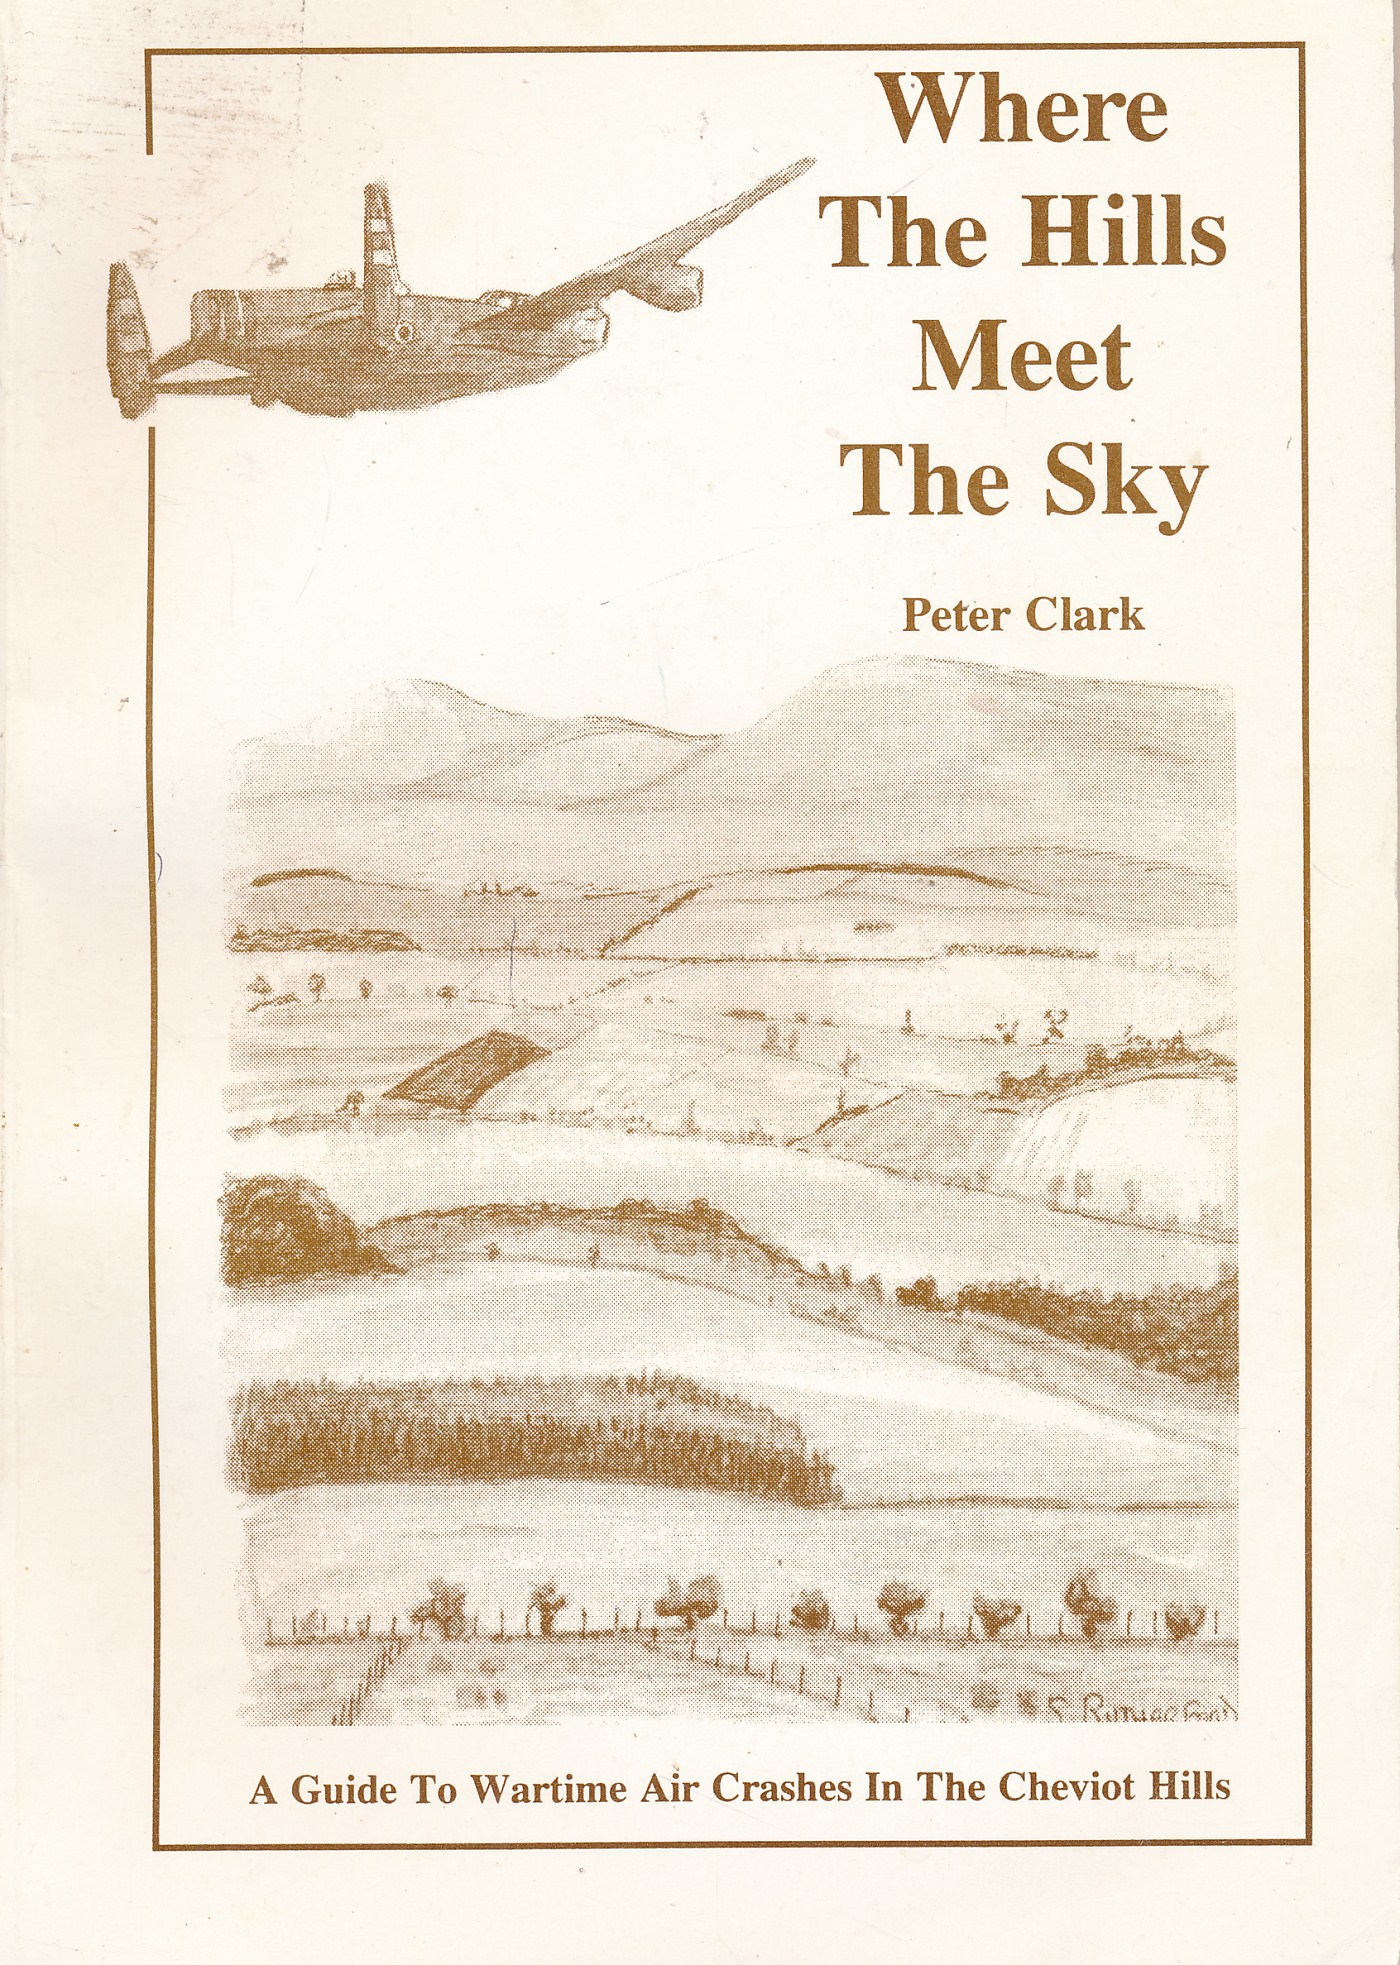 Where the Hills Meet the Sky. A Guide to Wartime Air Crashes in the Cheviot Hills.